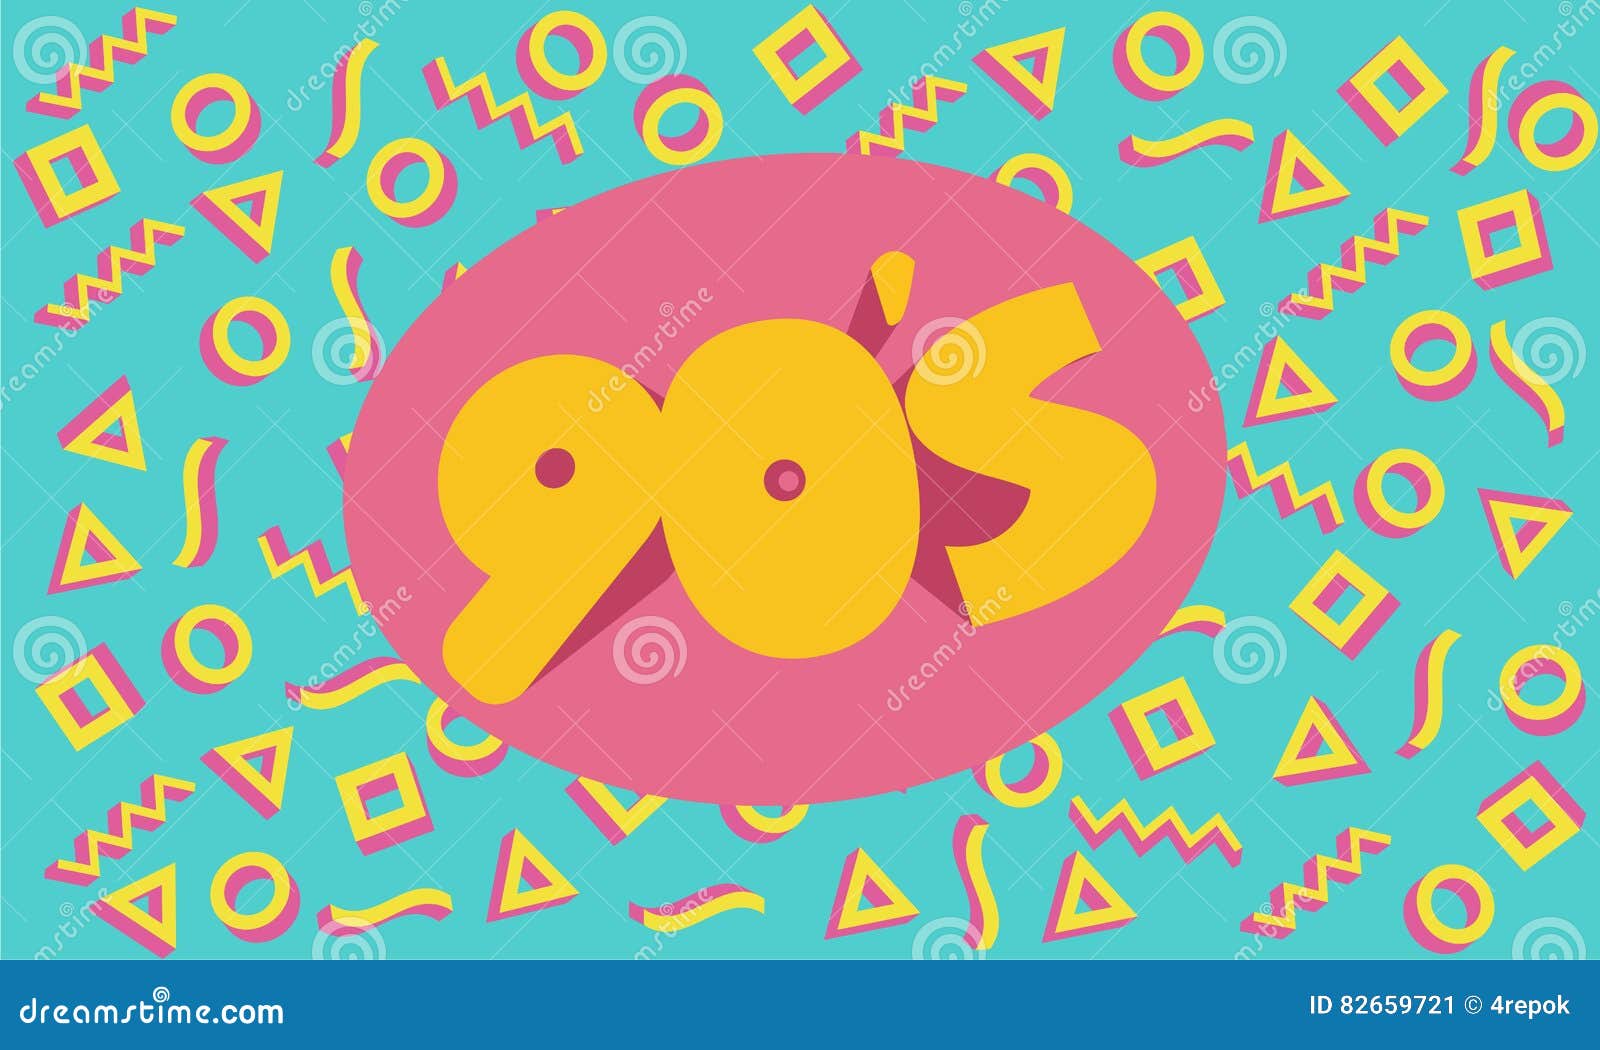  90s background or banners stock vector Illustration of 